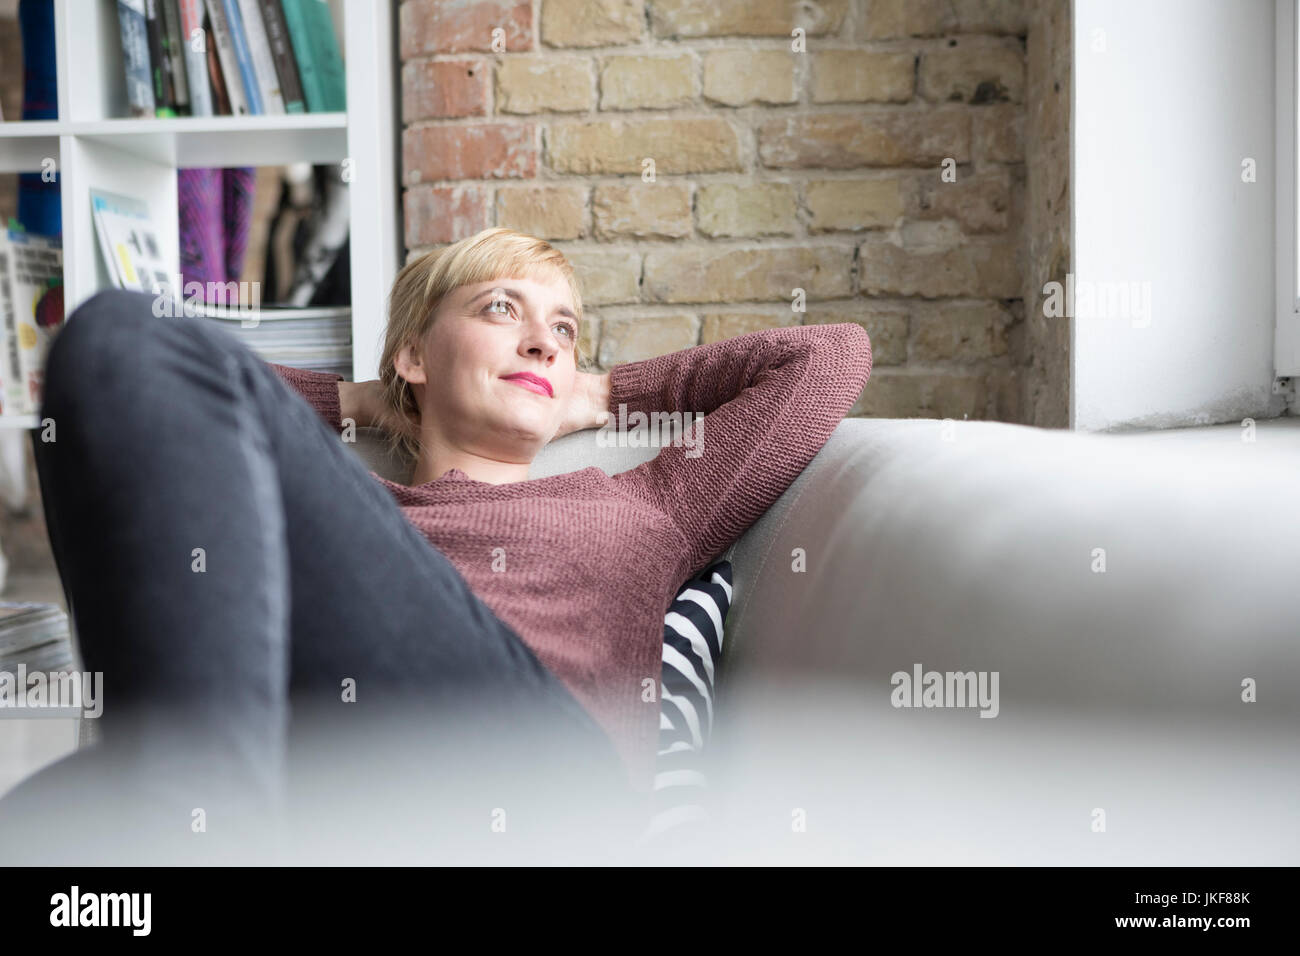 Woman relaxing at home Banque D'Images